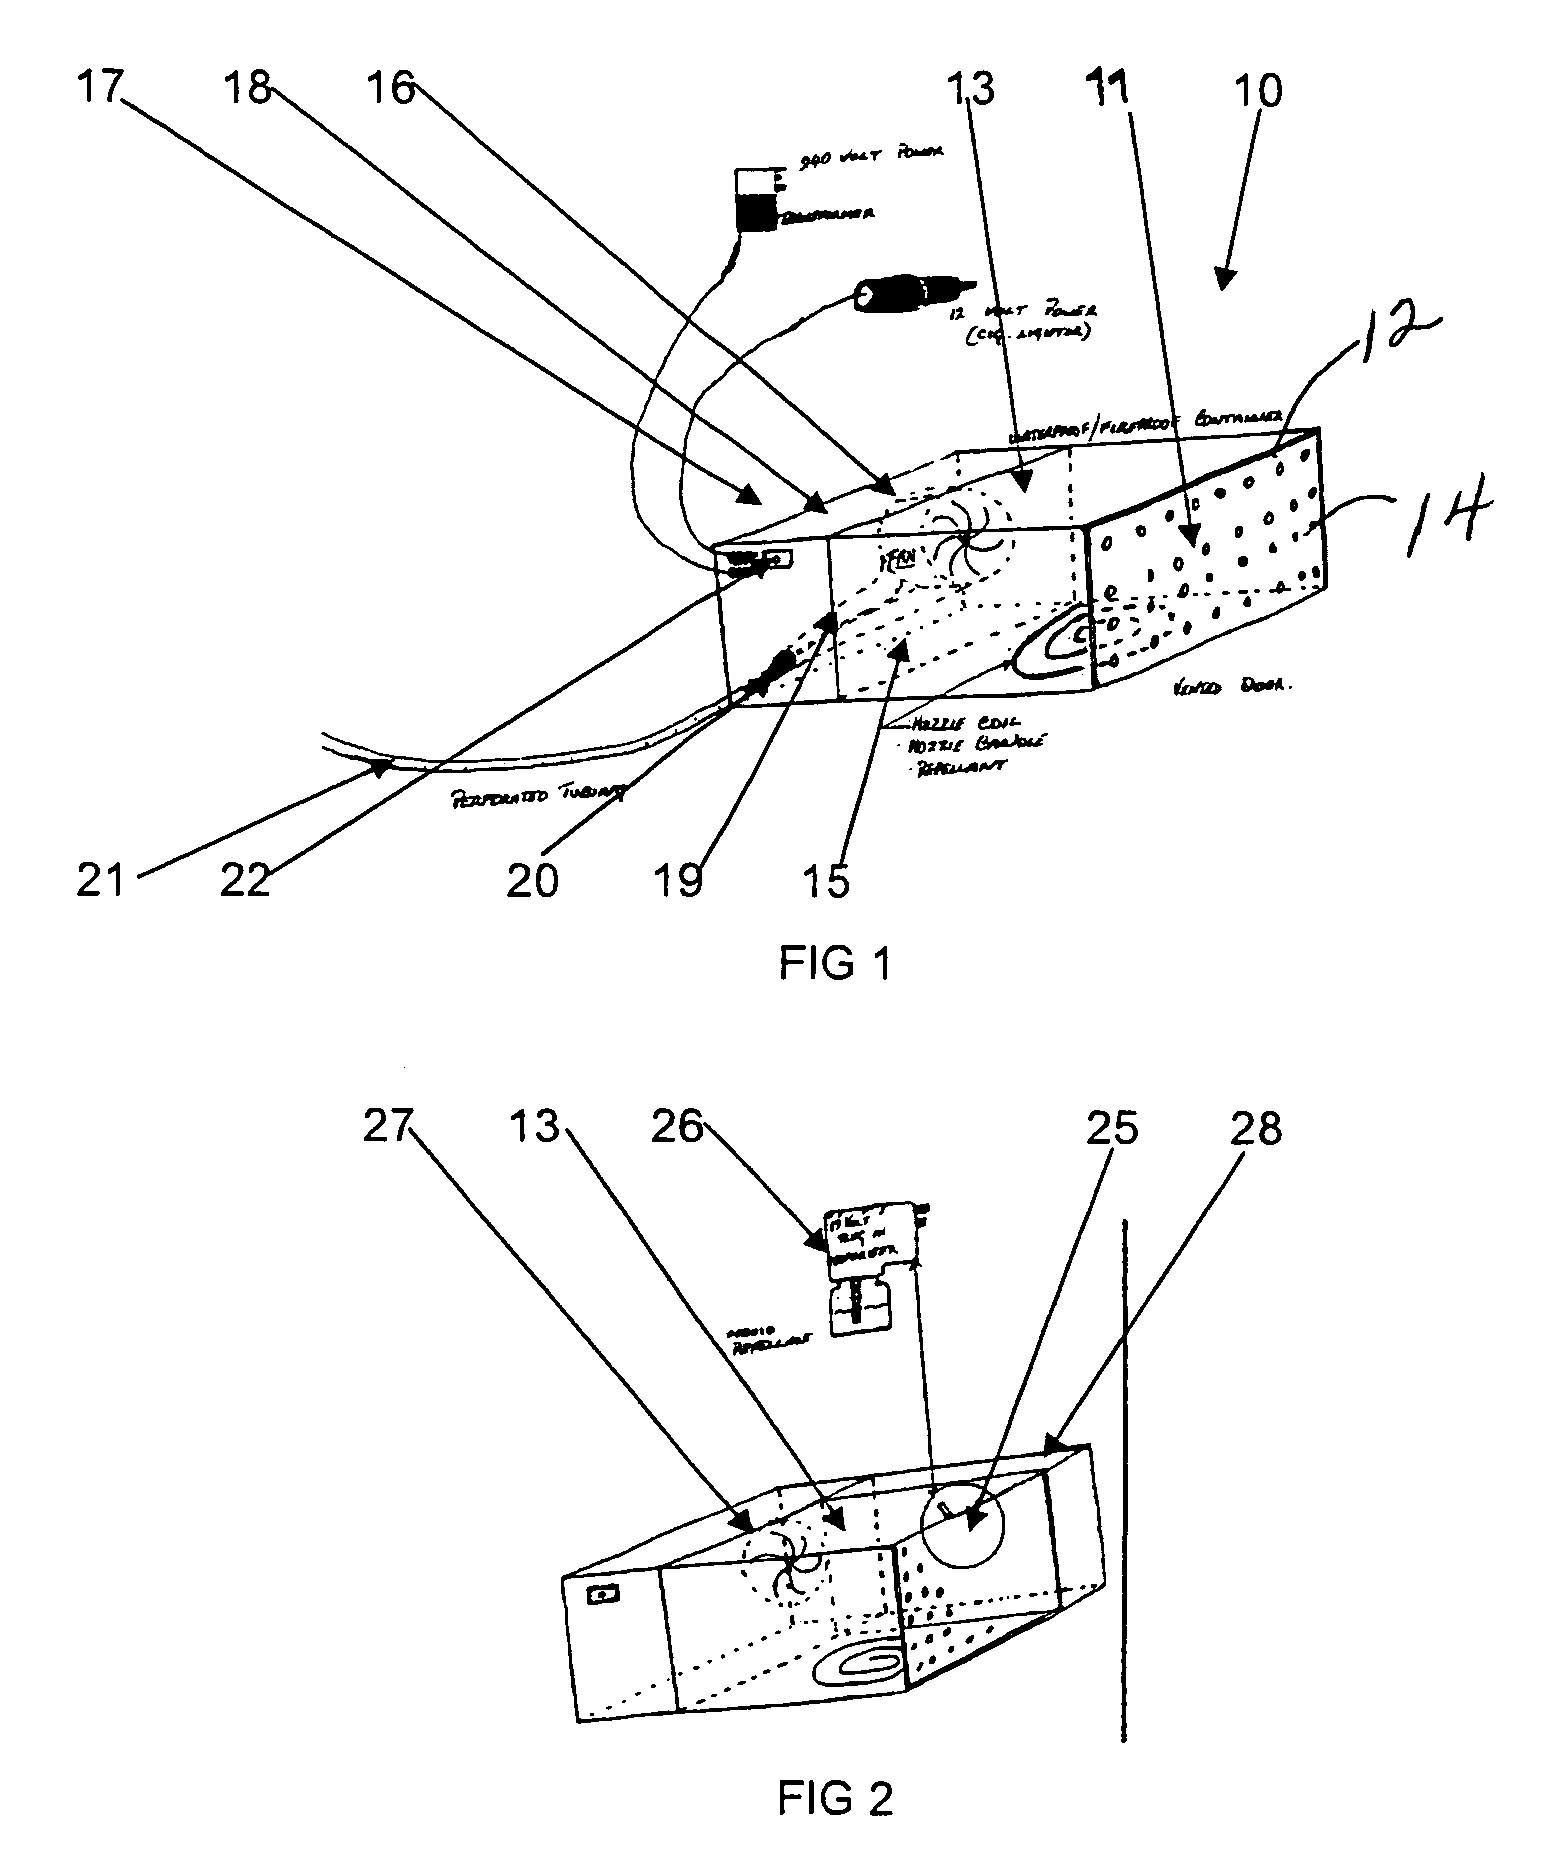 Apparatus to better distribute an insect repellant or fragrance